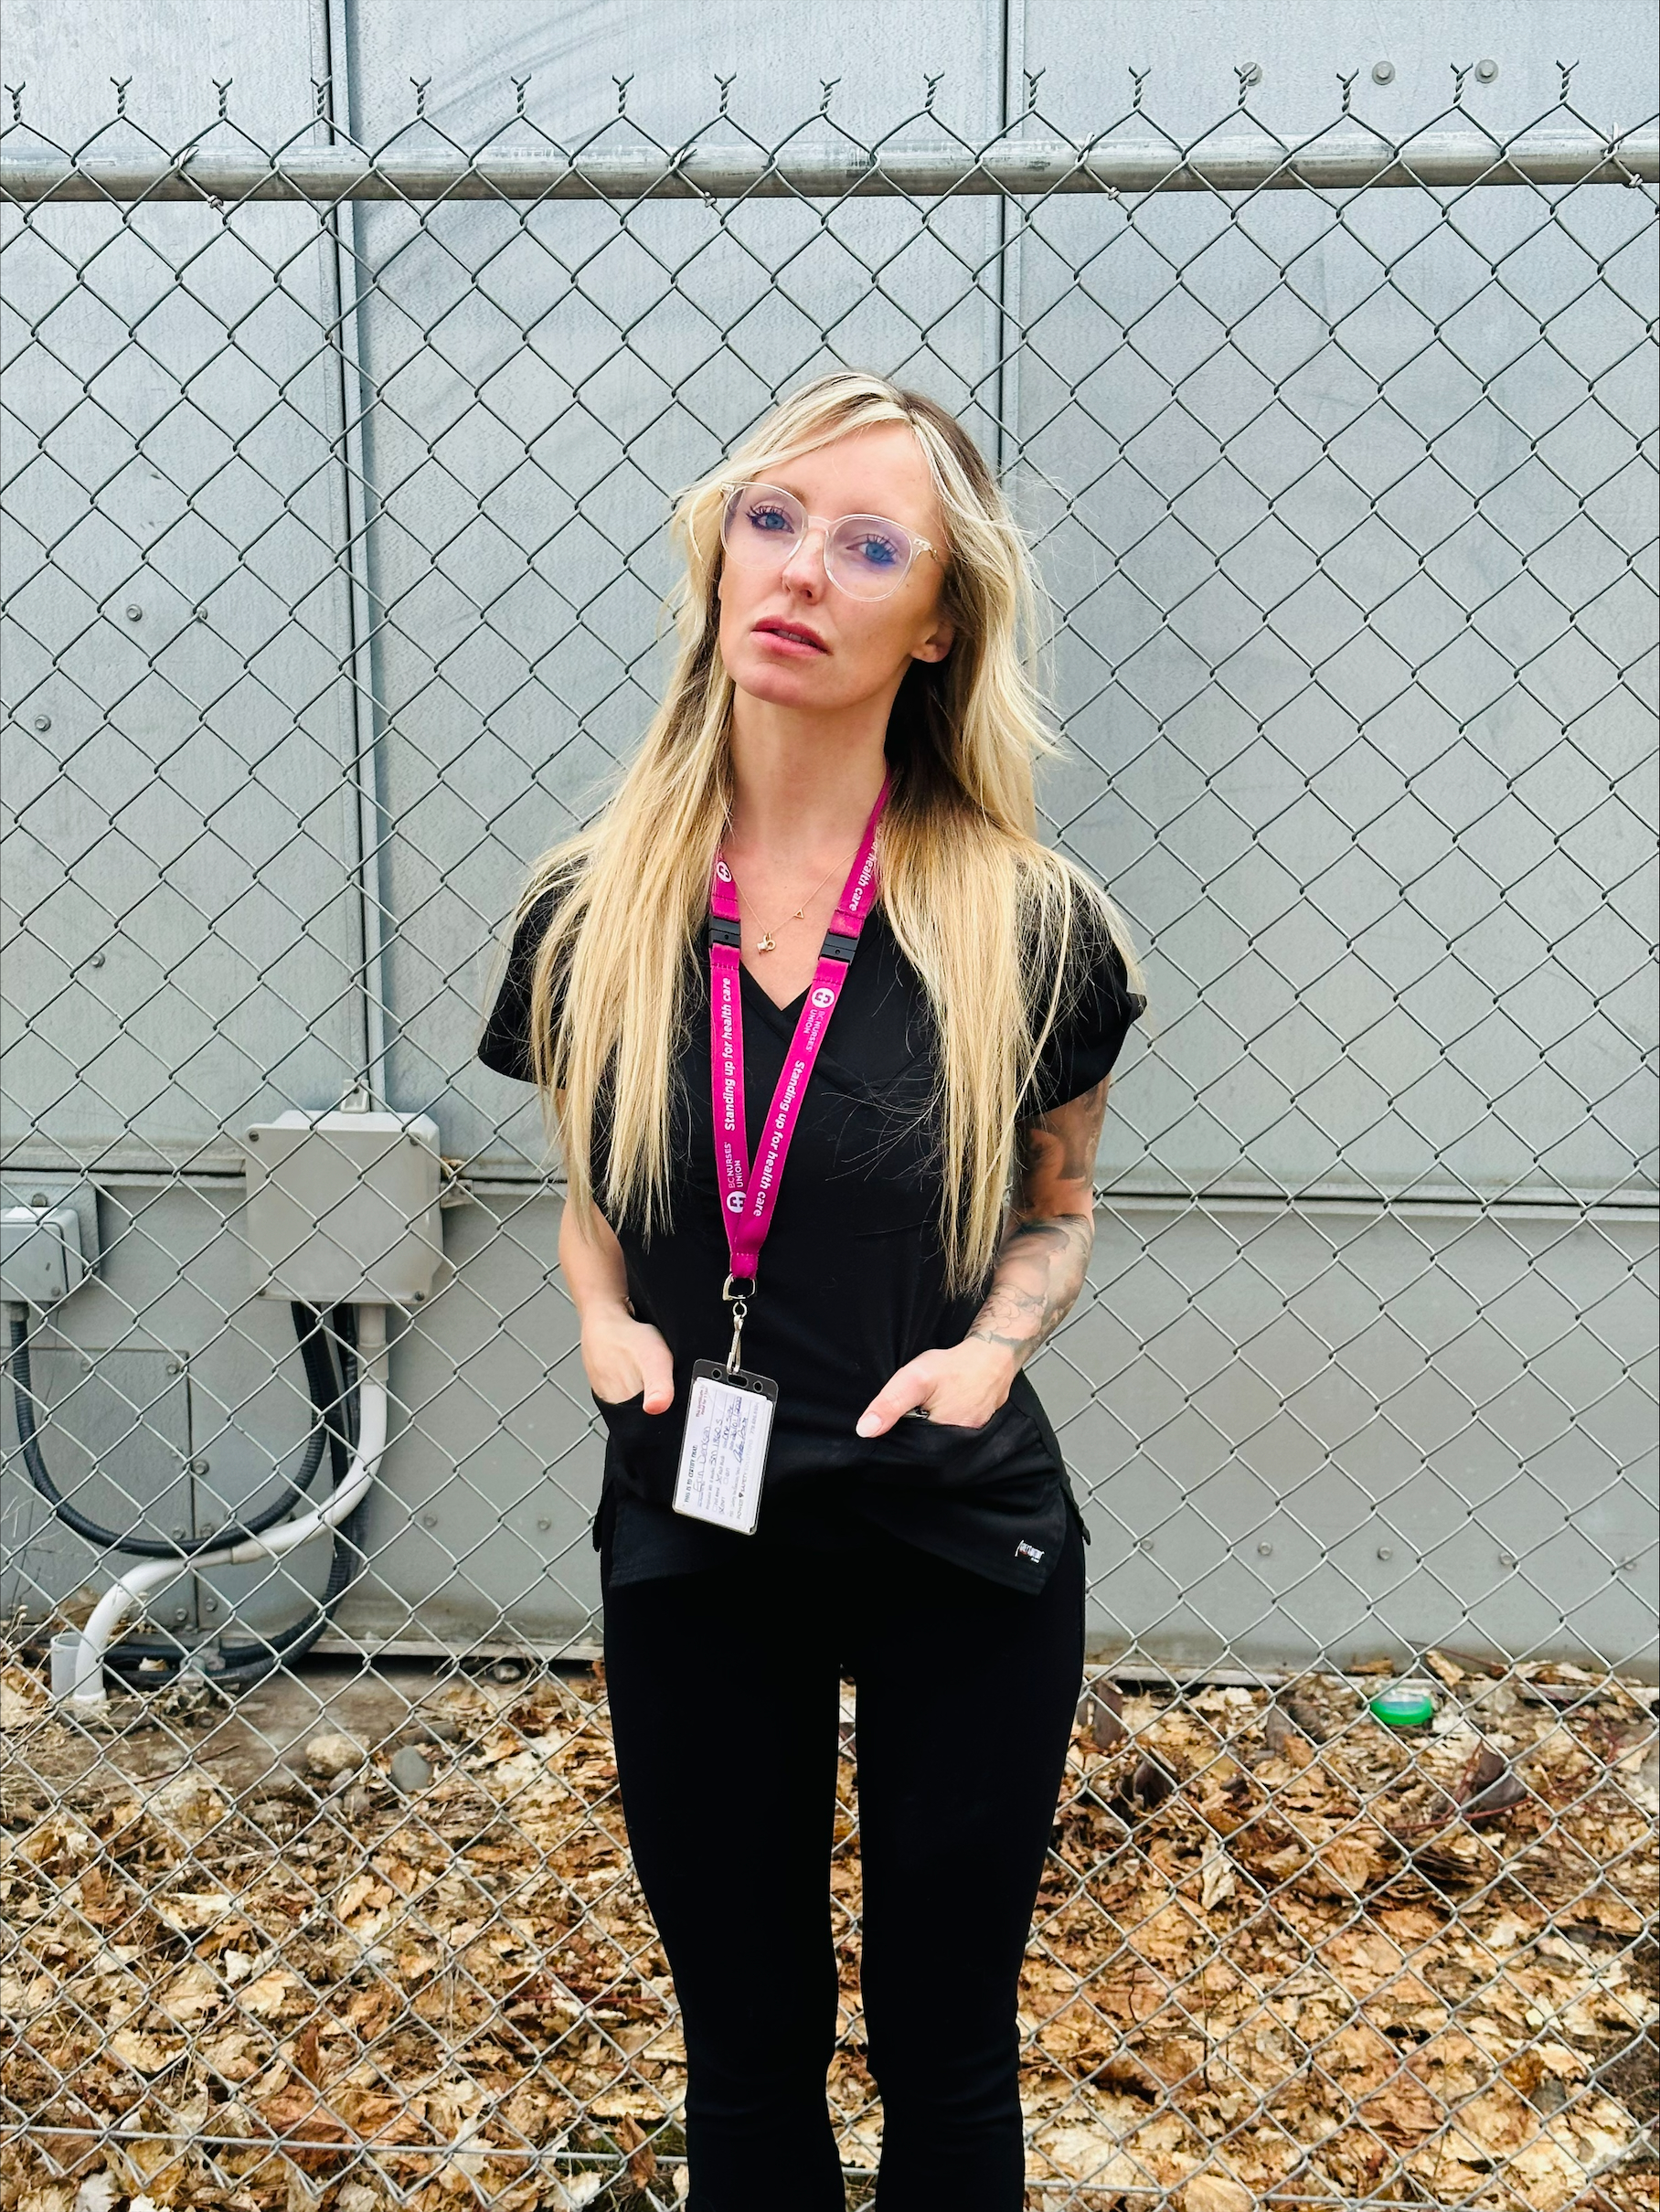 A person in black tshirt and pants with long blonde hair stands with their hands in their pockets in front of a chain link fence.